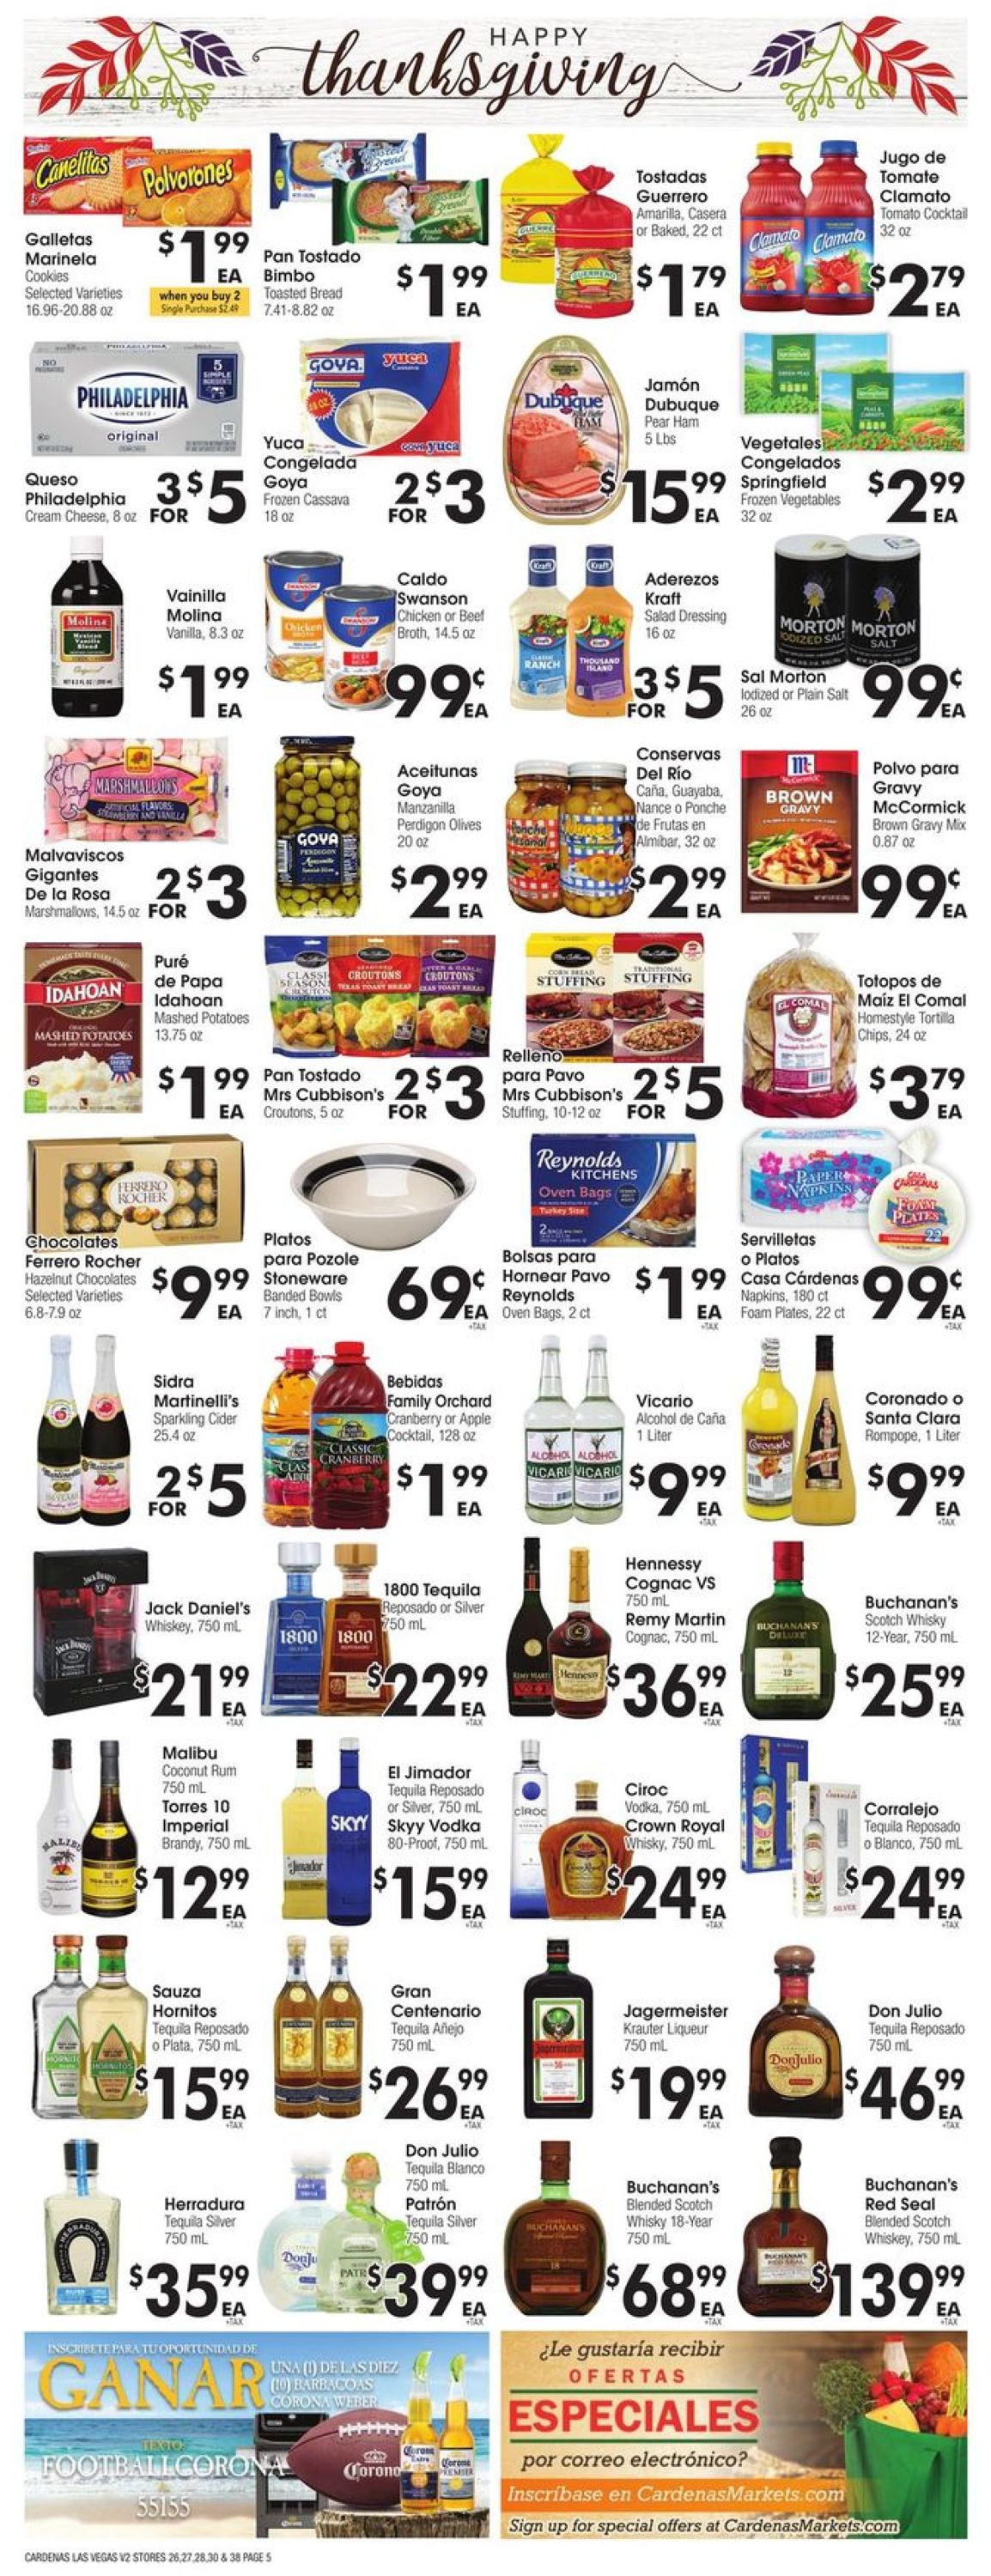 Catalogue Cardenas Thanksgiving 2020 from 11/18/2020